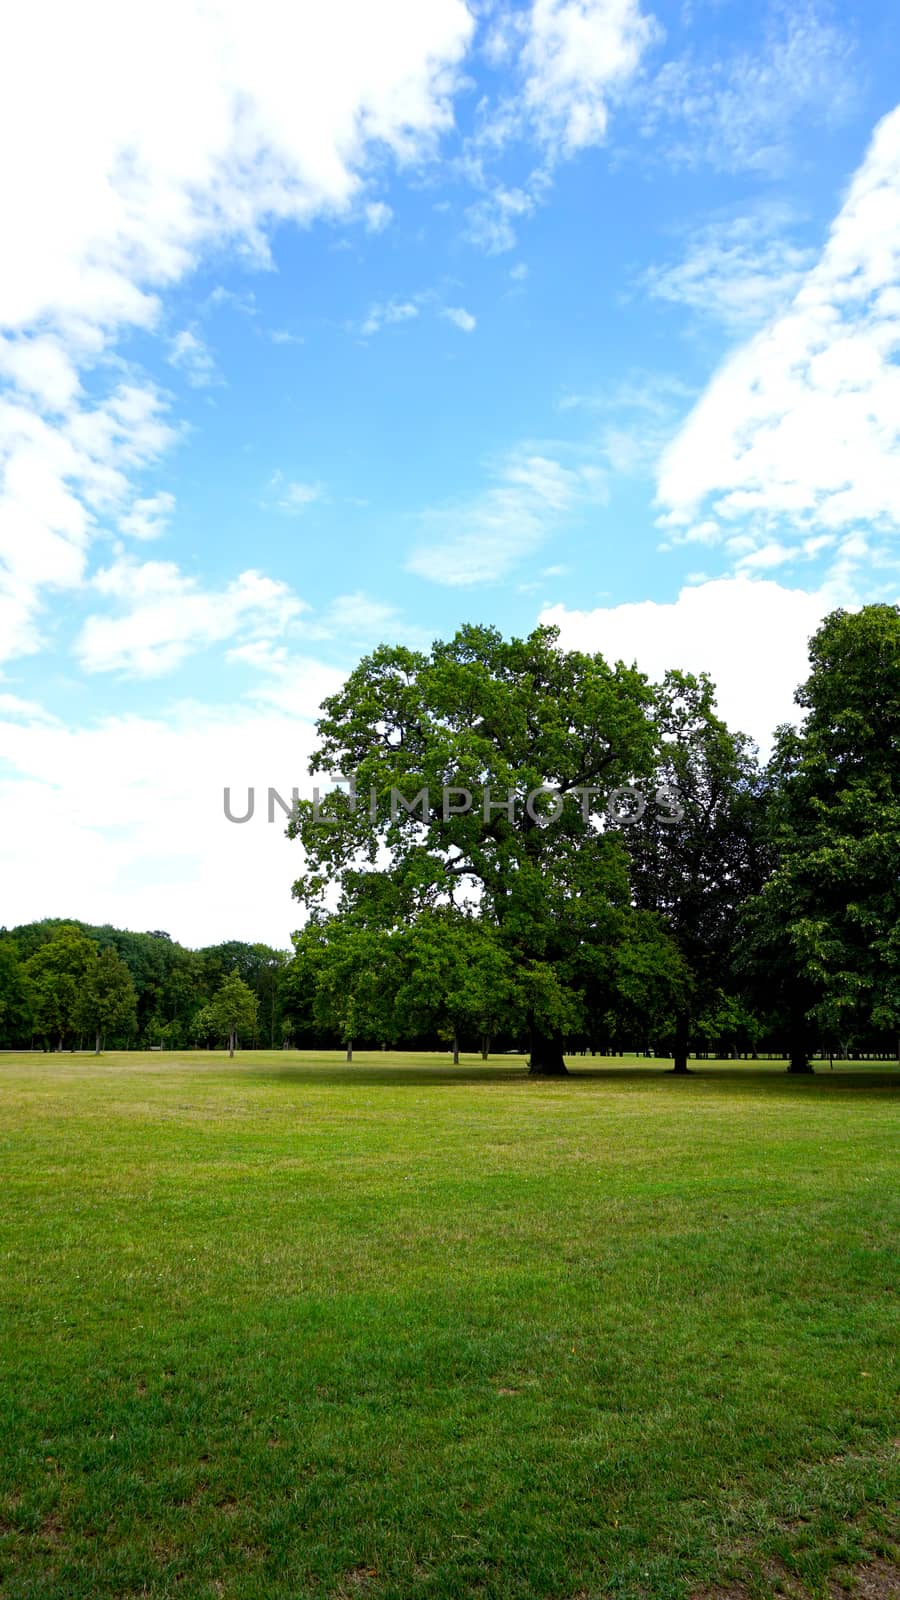 tree in the park with blue sky cloud background